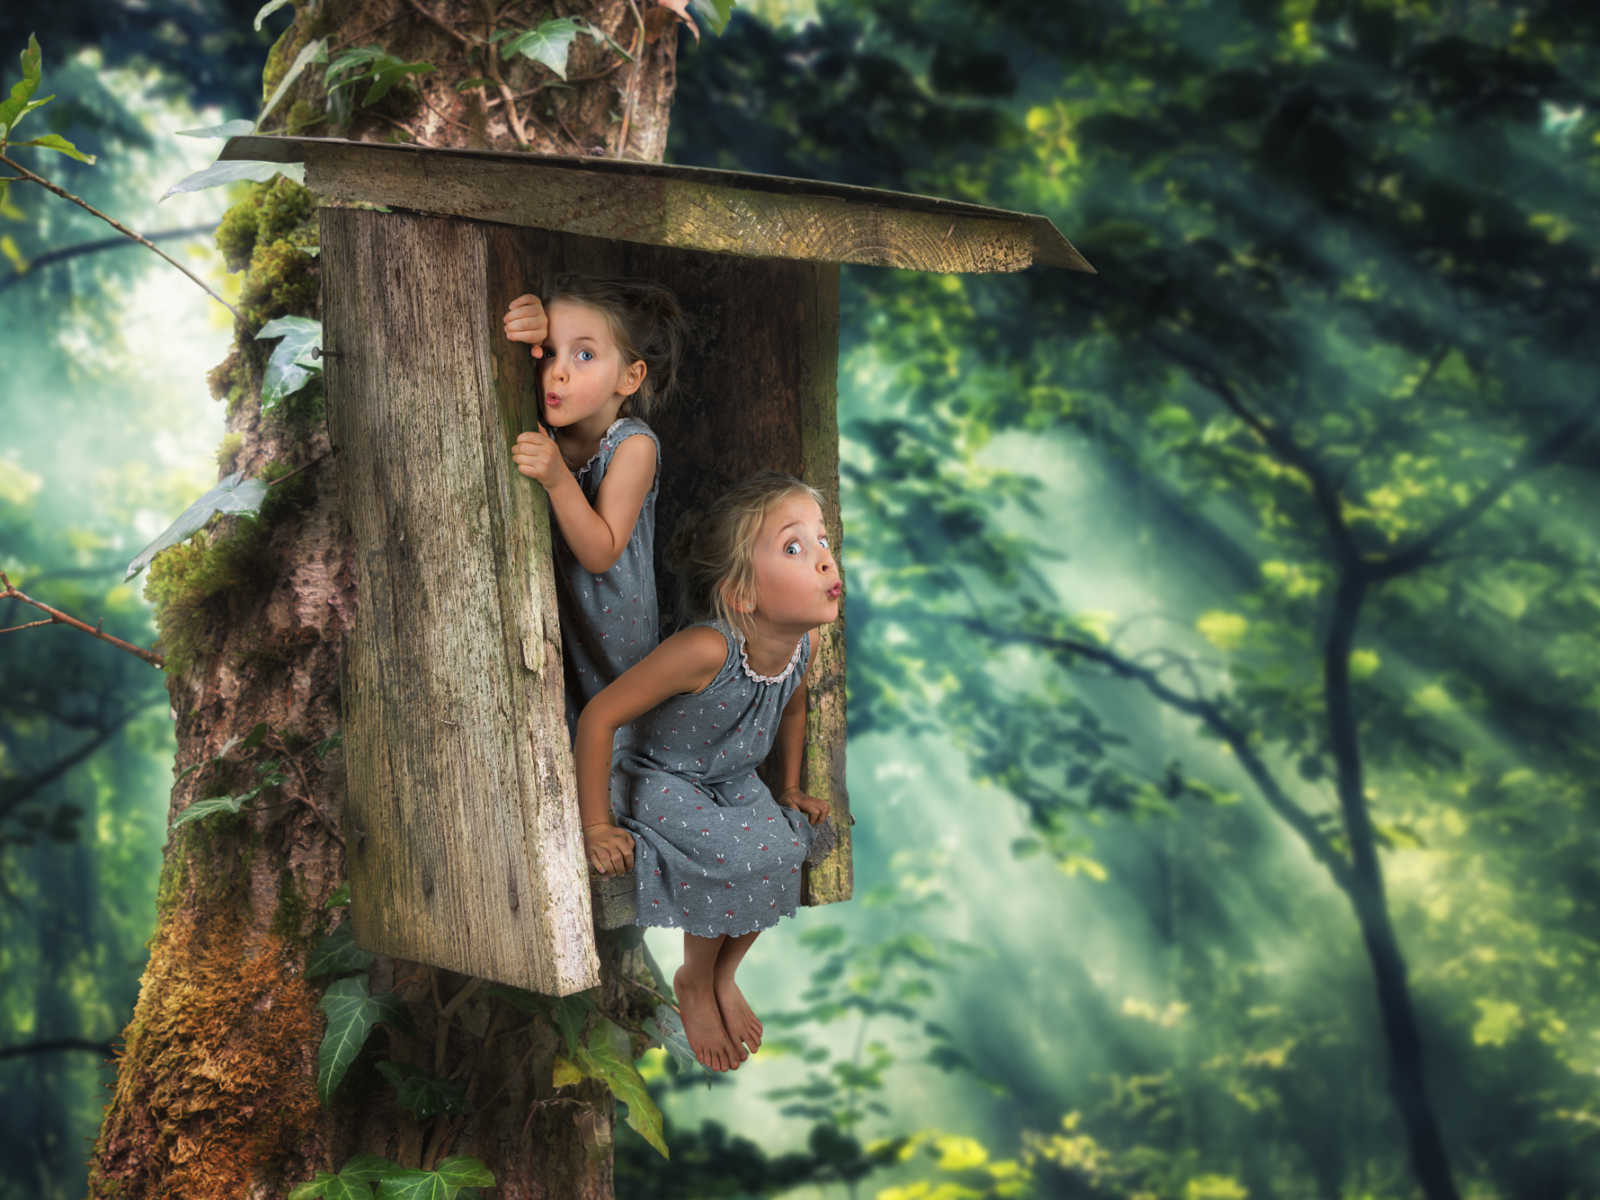 young girls in gray nightgowns sit in wooden structure in animated forest